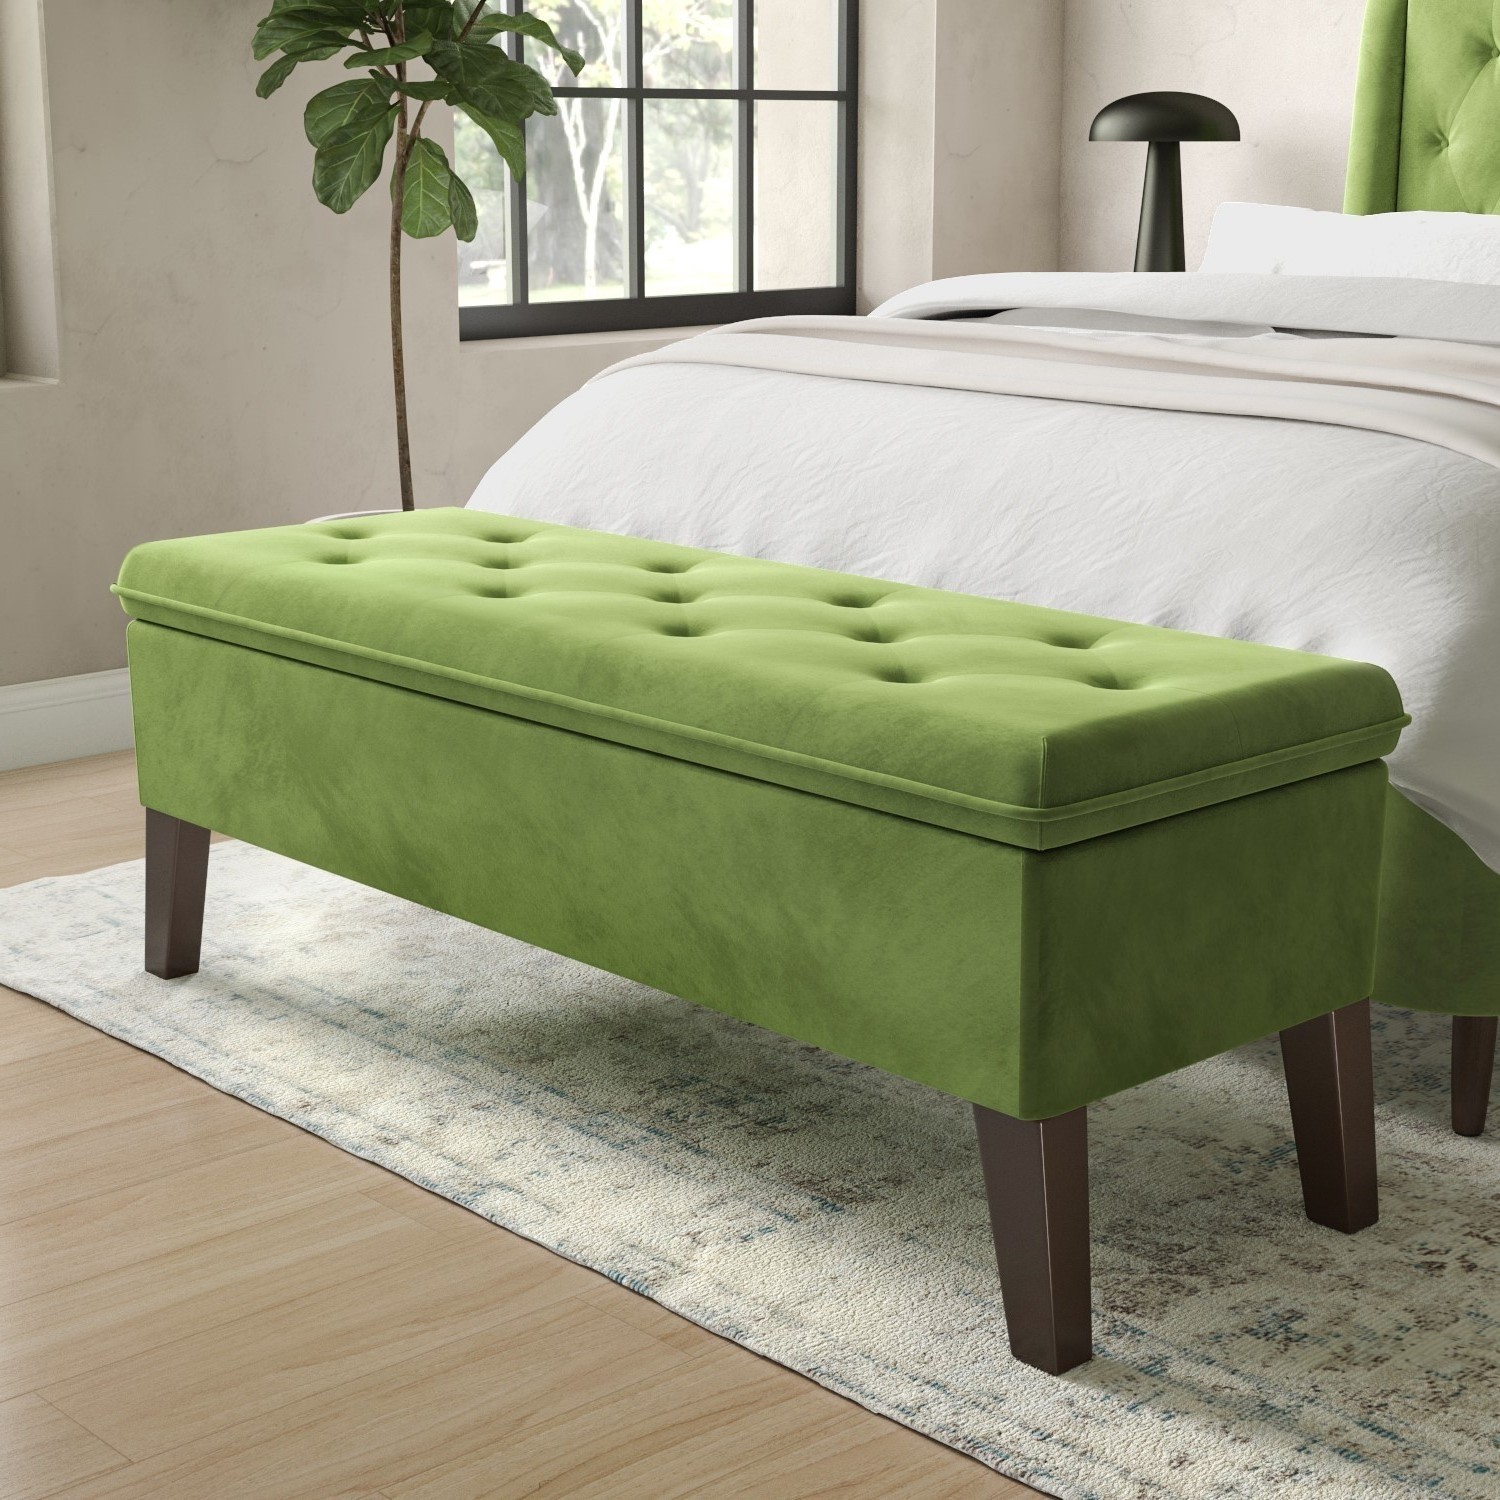 Photo of Cushioned end-of-bed ottoman storage bench in green velvet - cameron